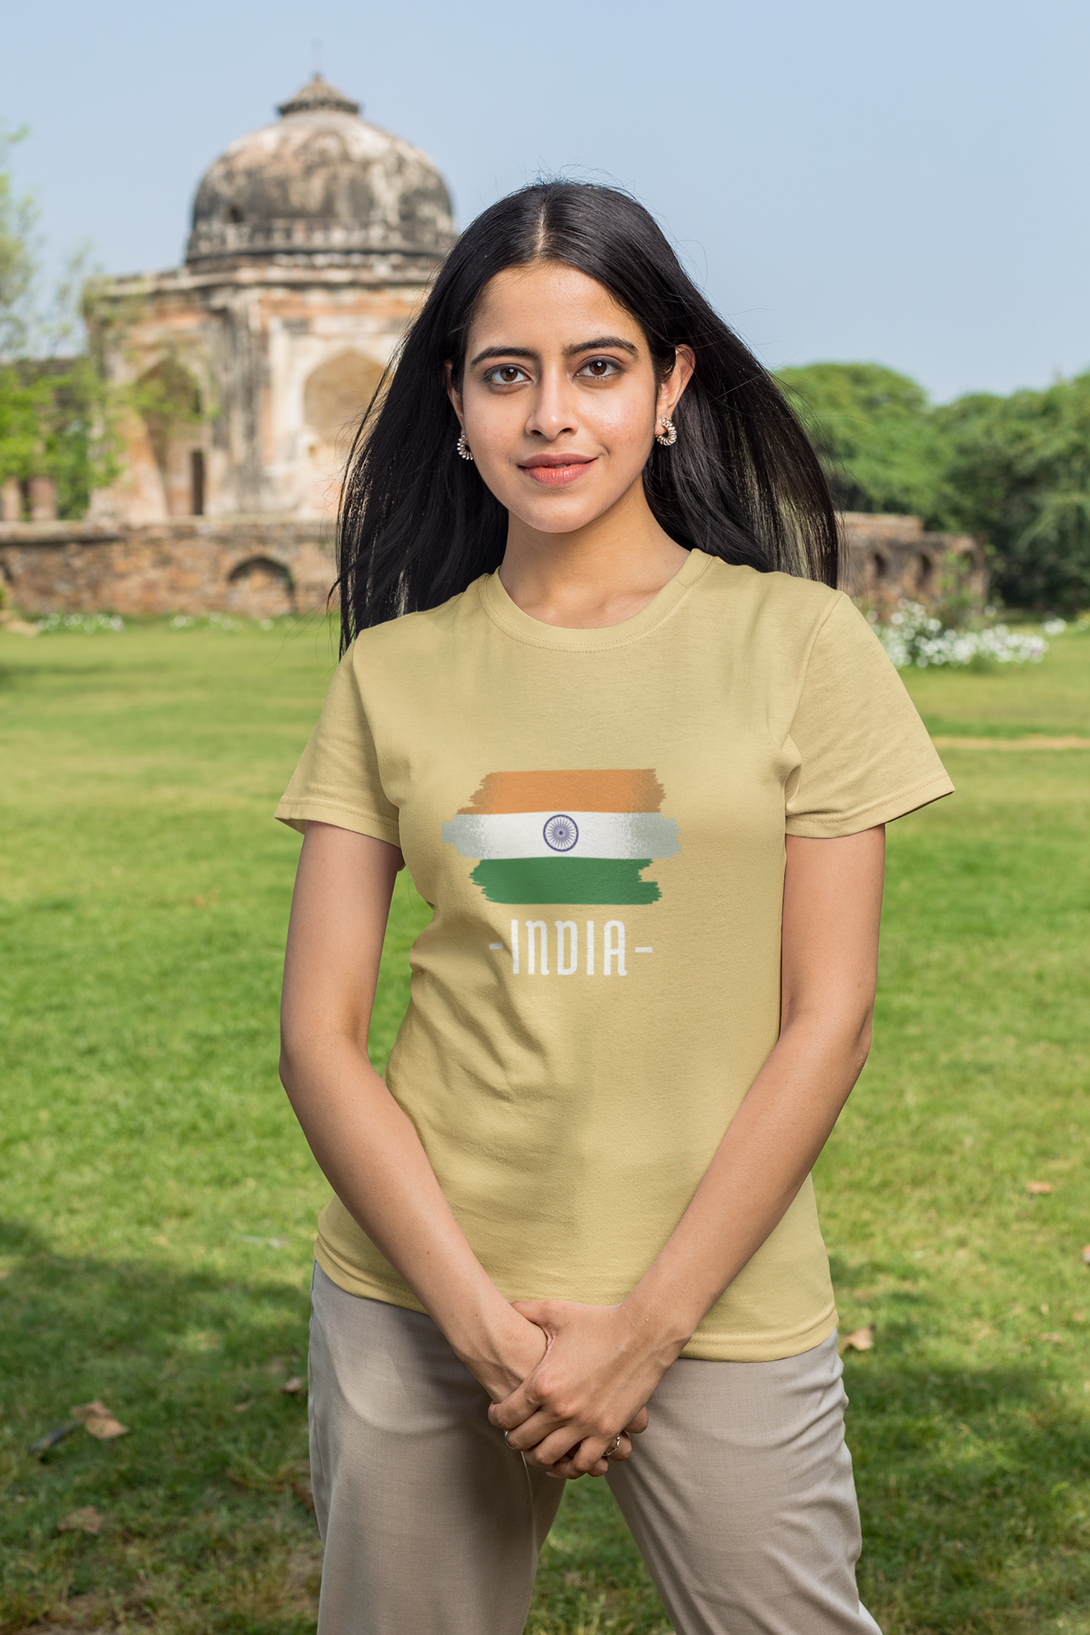 Proud Tricolor Printed T-Shirt For Women - WowWaves - 4